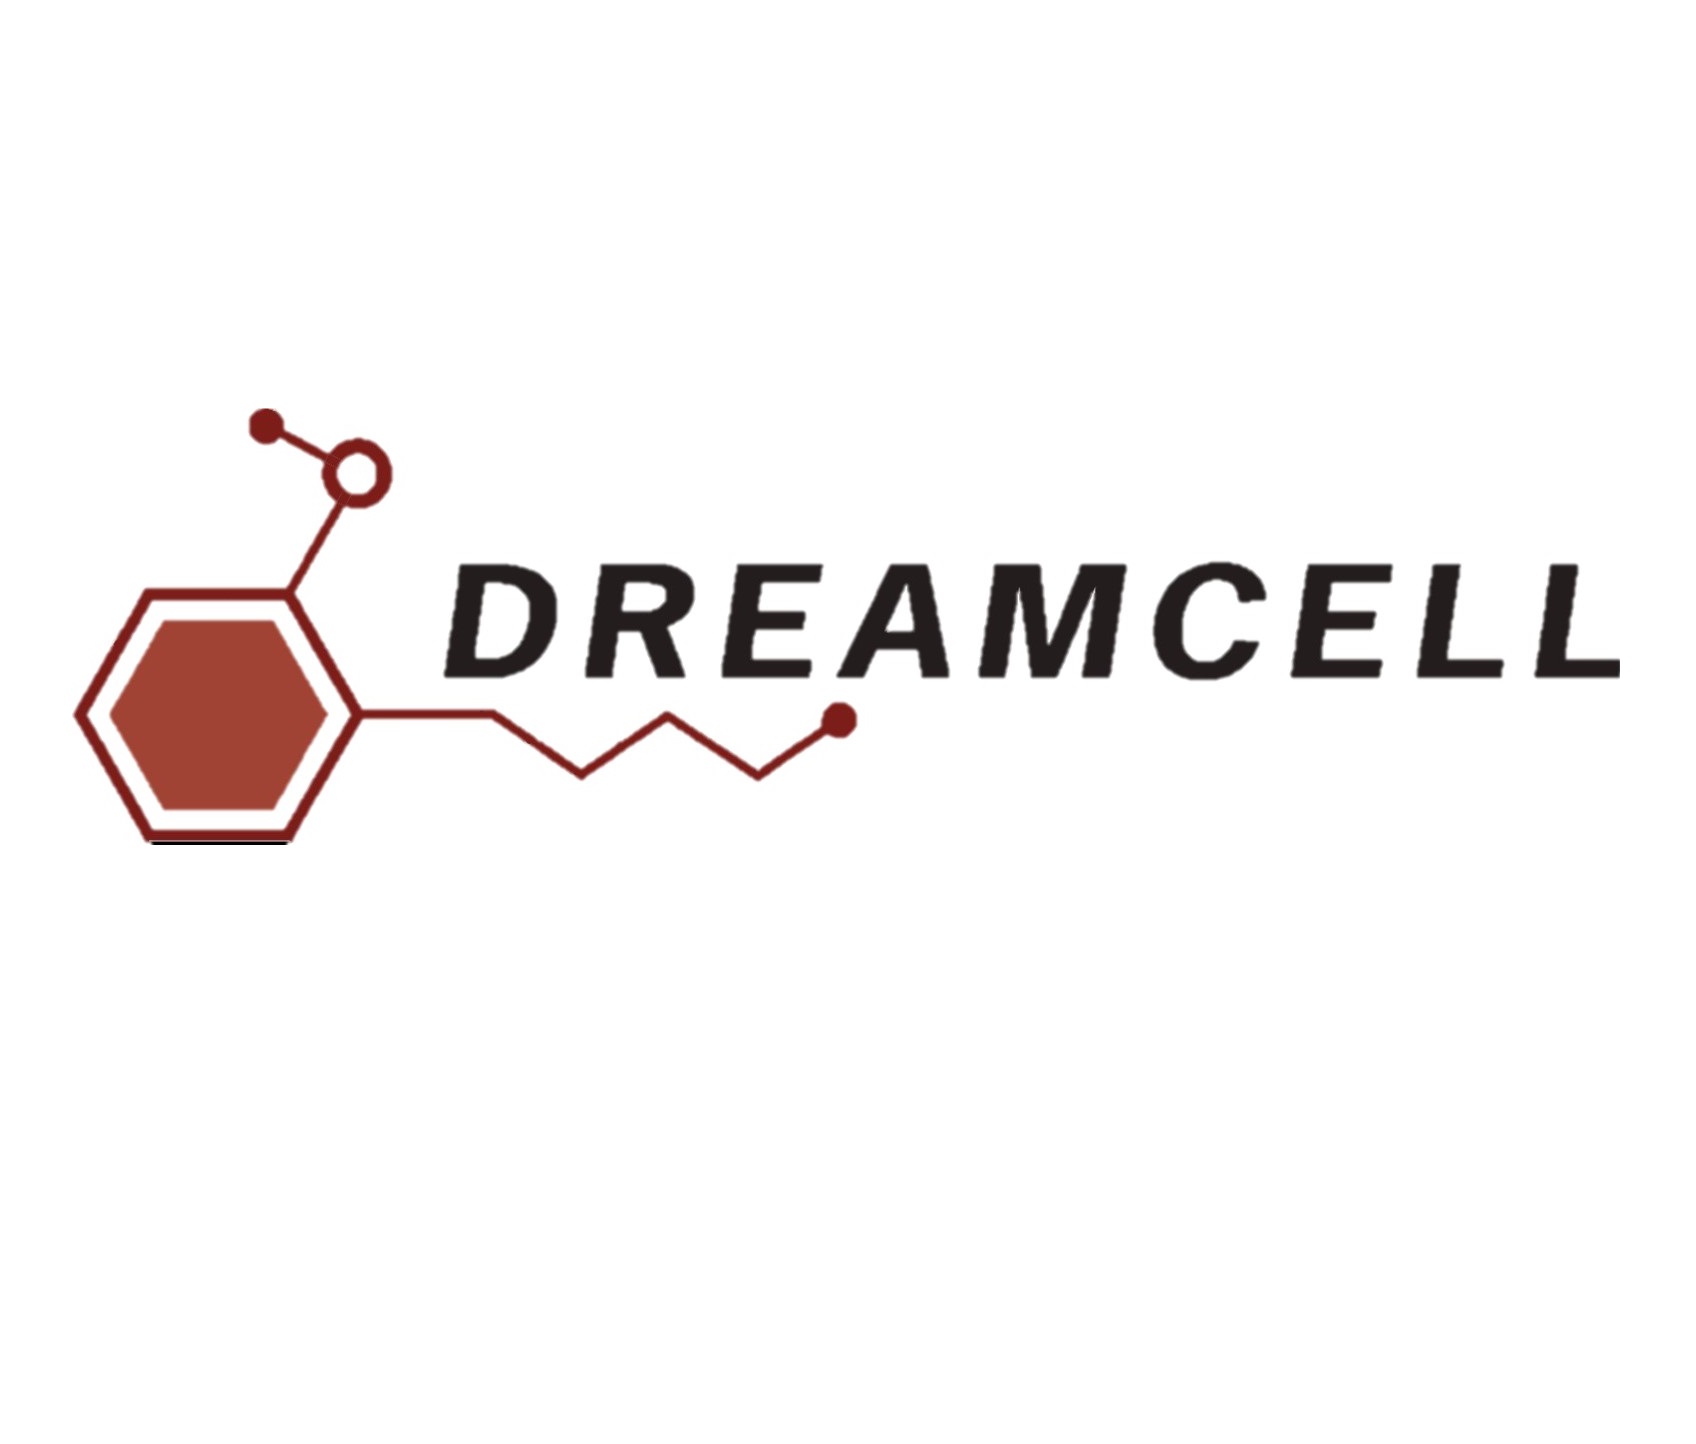 Dreamcell